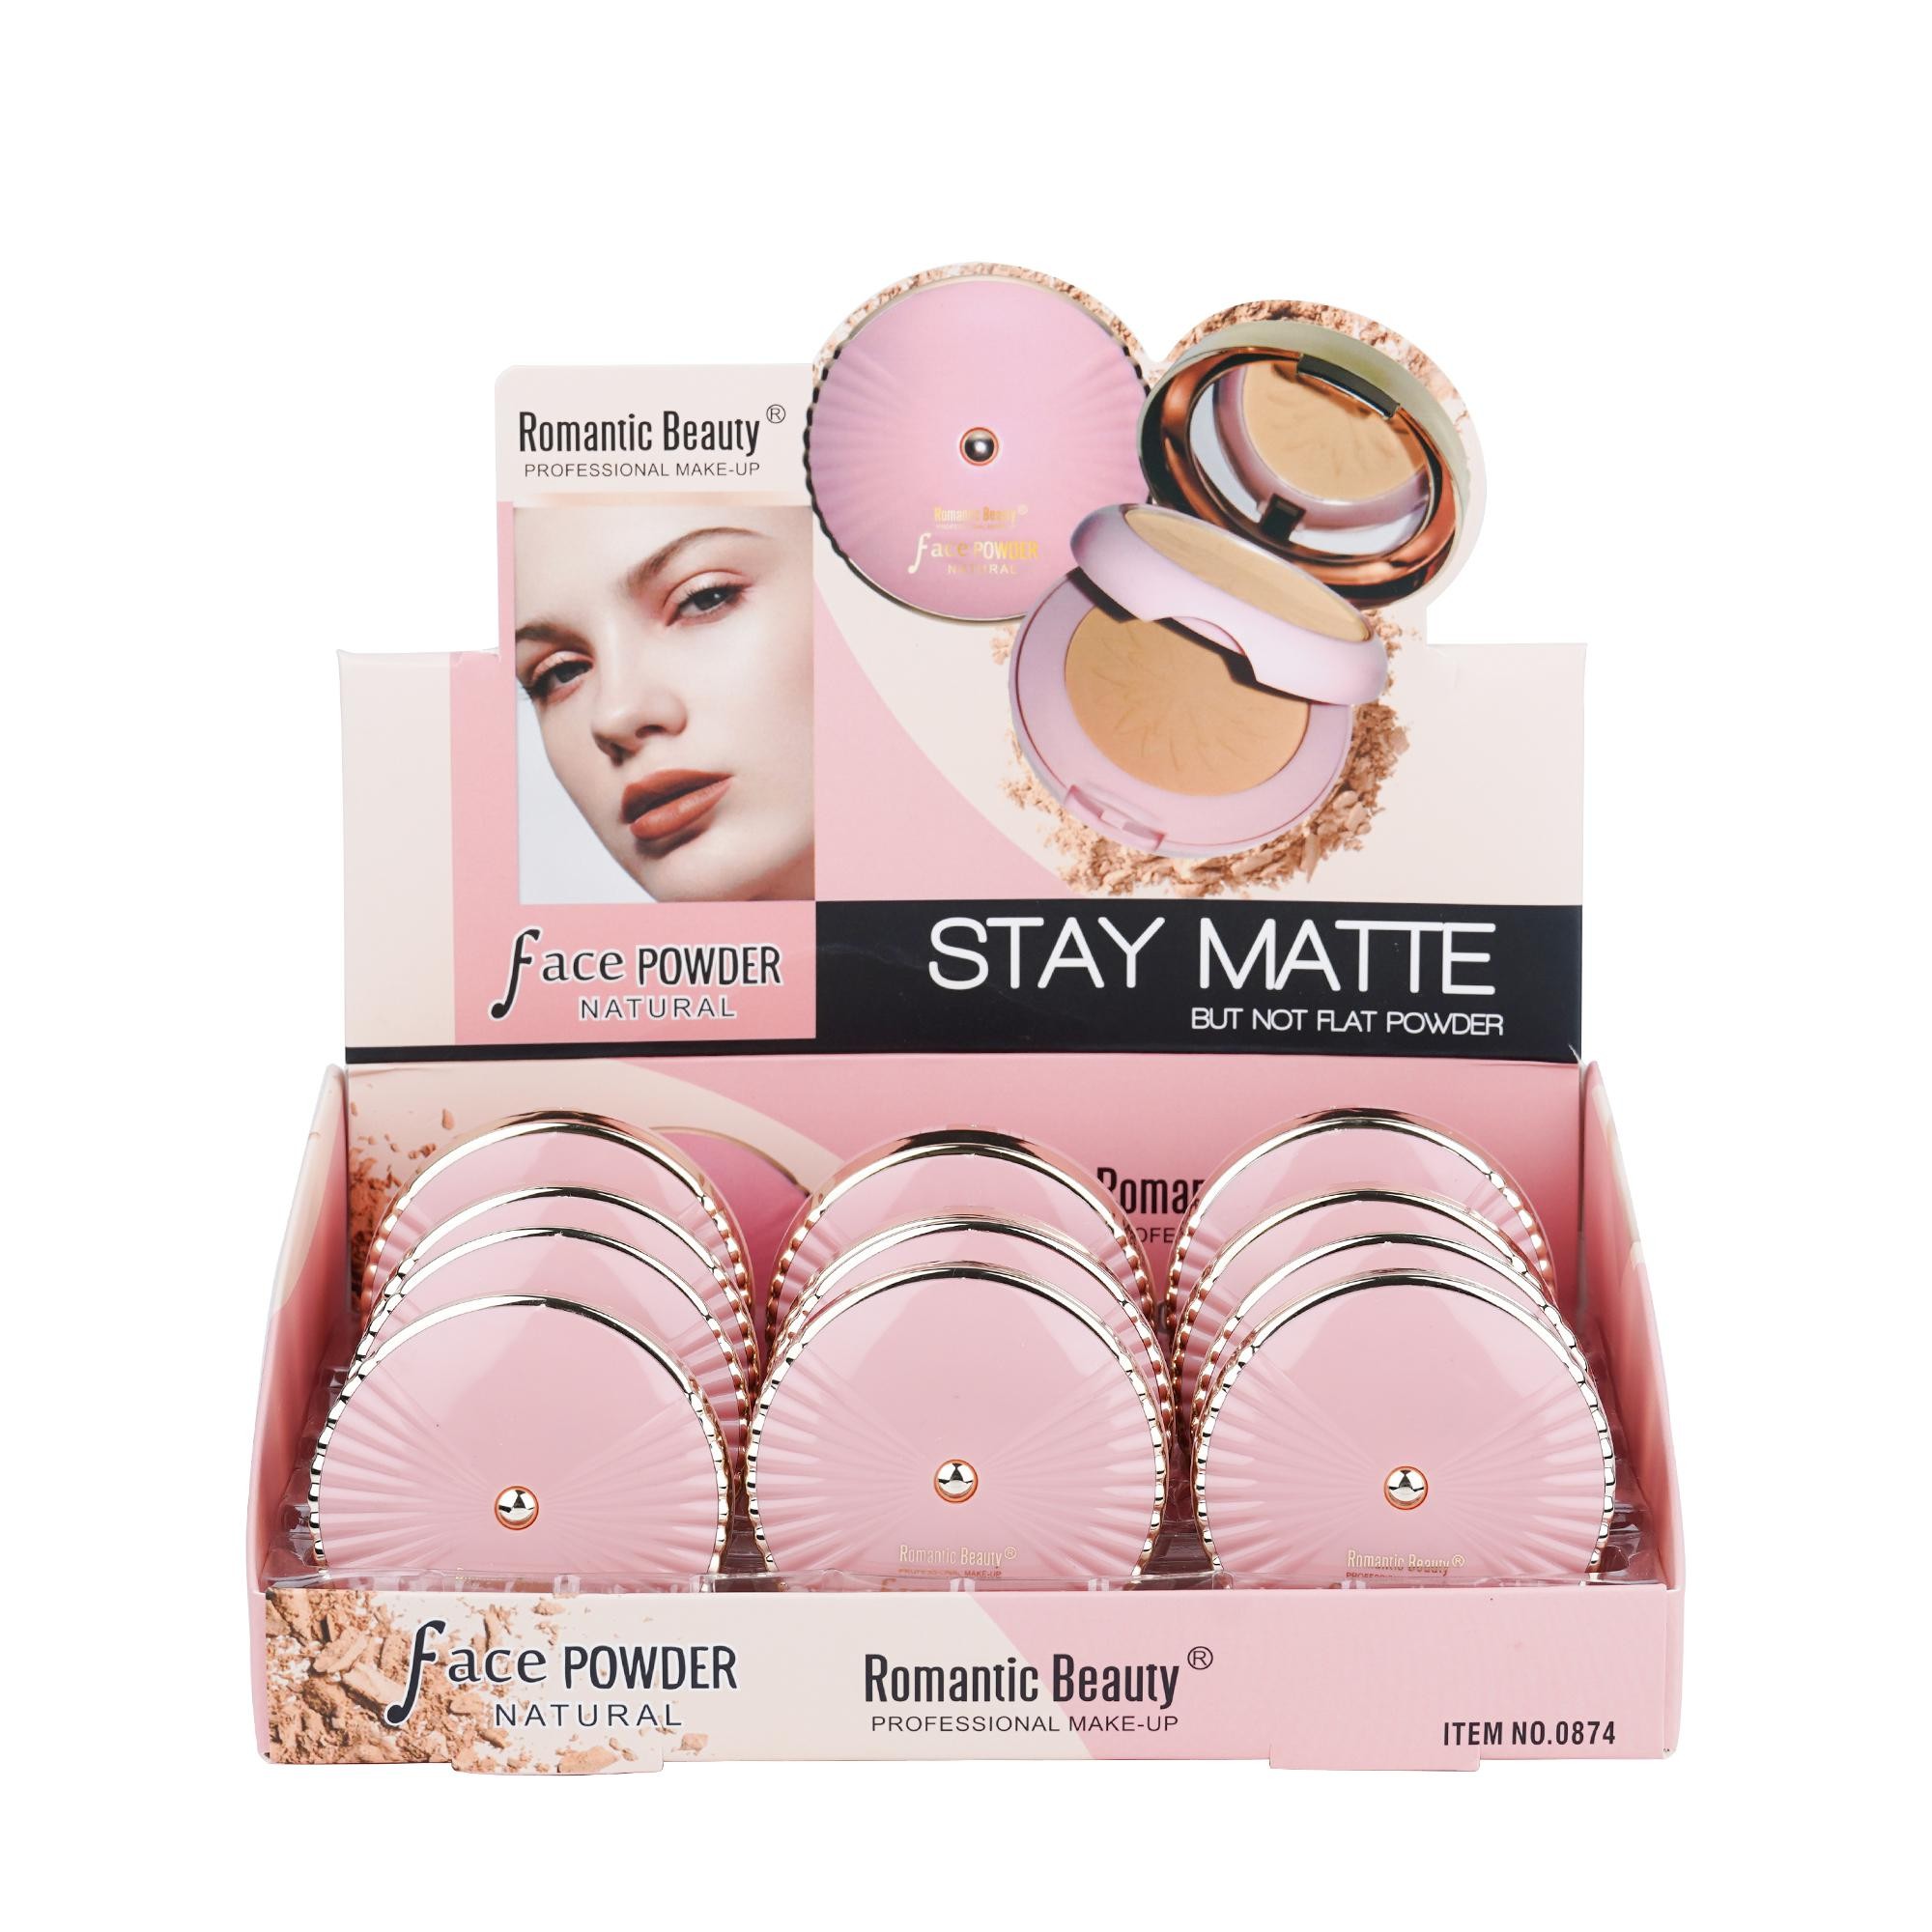 Pack 12 unidades. Polvo Compacto. STAY MATTE